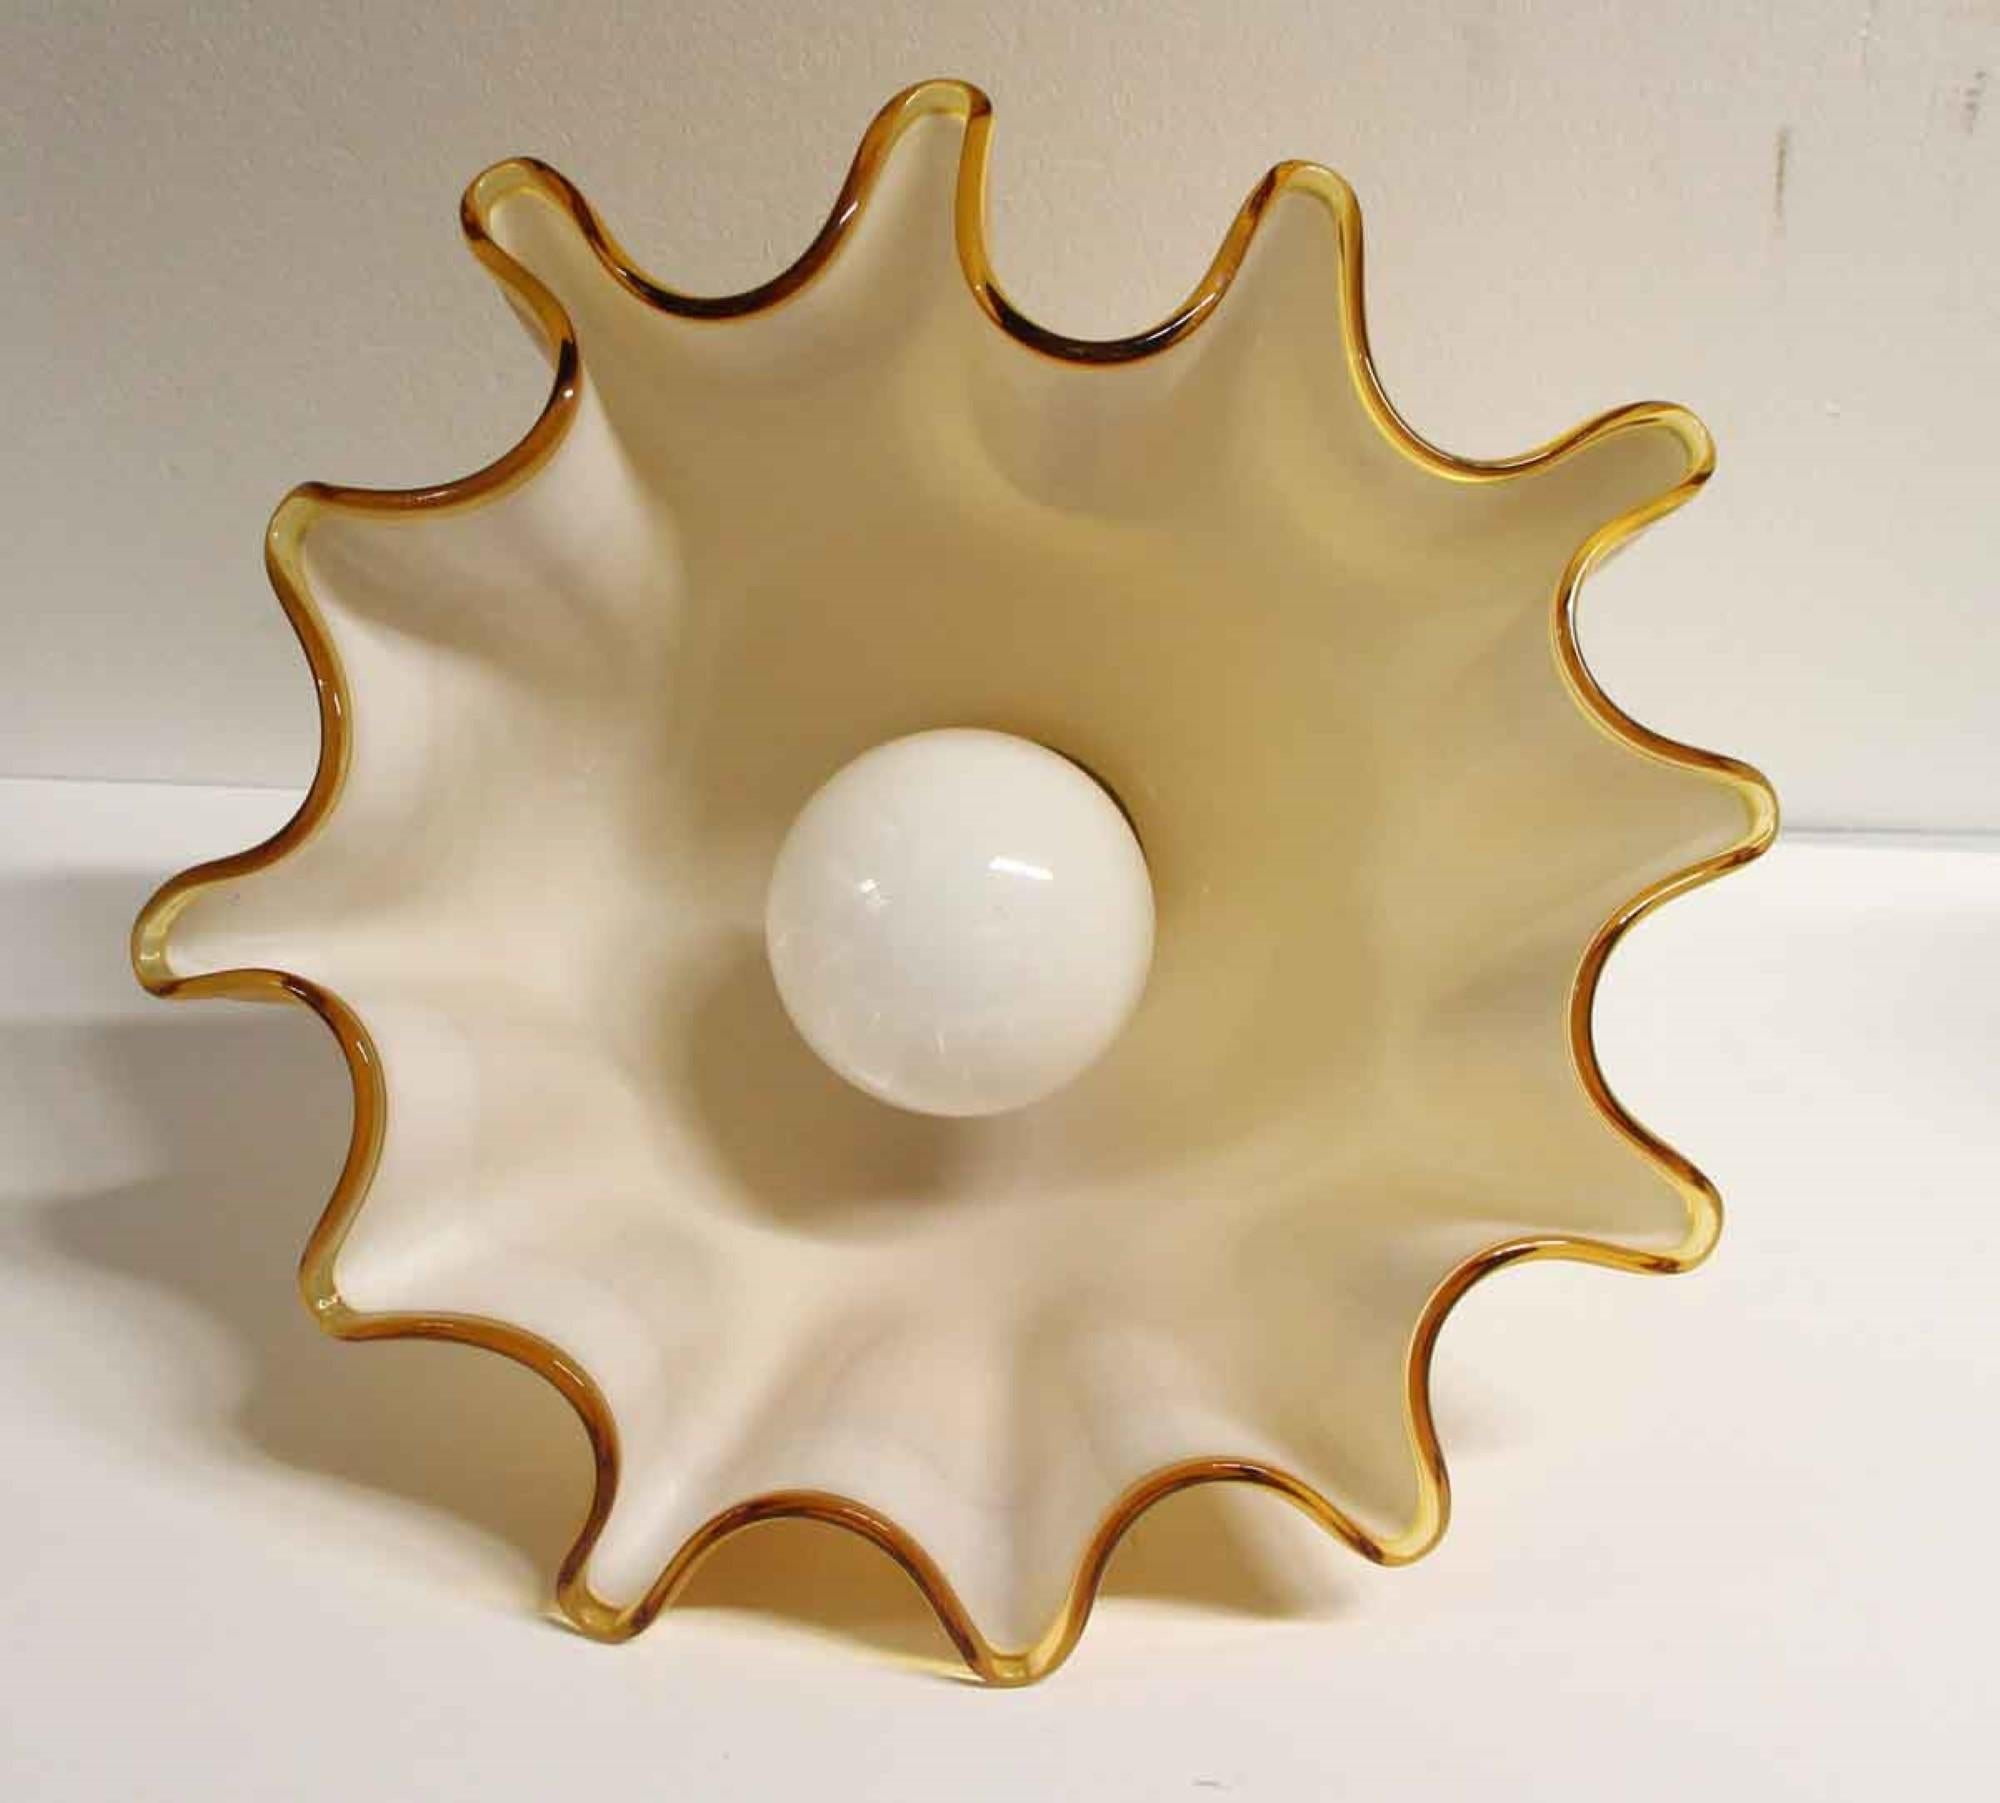 Brass 1980s Modern Murano Hand Ruffled Glass Pendant Light in a Yellow Color